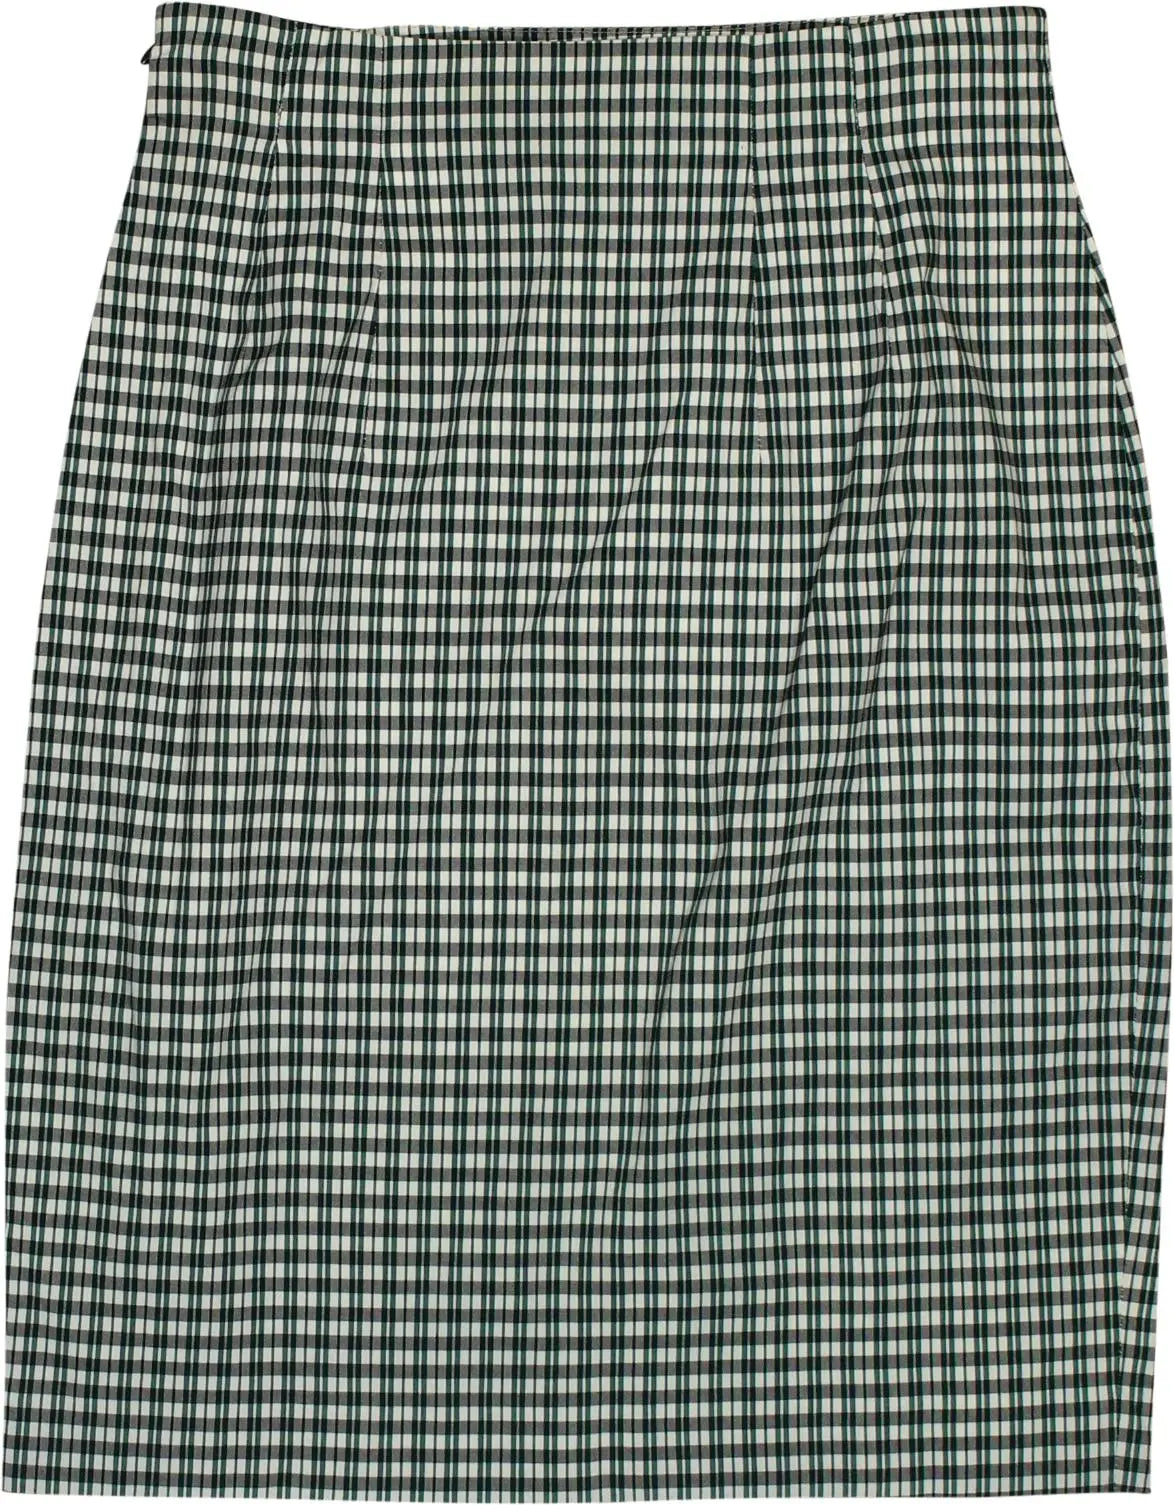 Orwell - Checkered pencil skirt- ThriftTale.com - Vintage and second handclothing